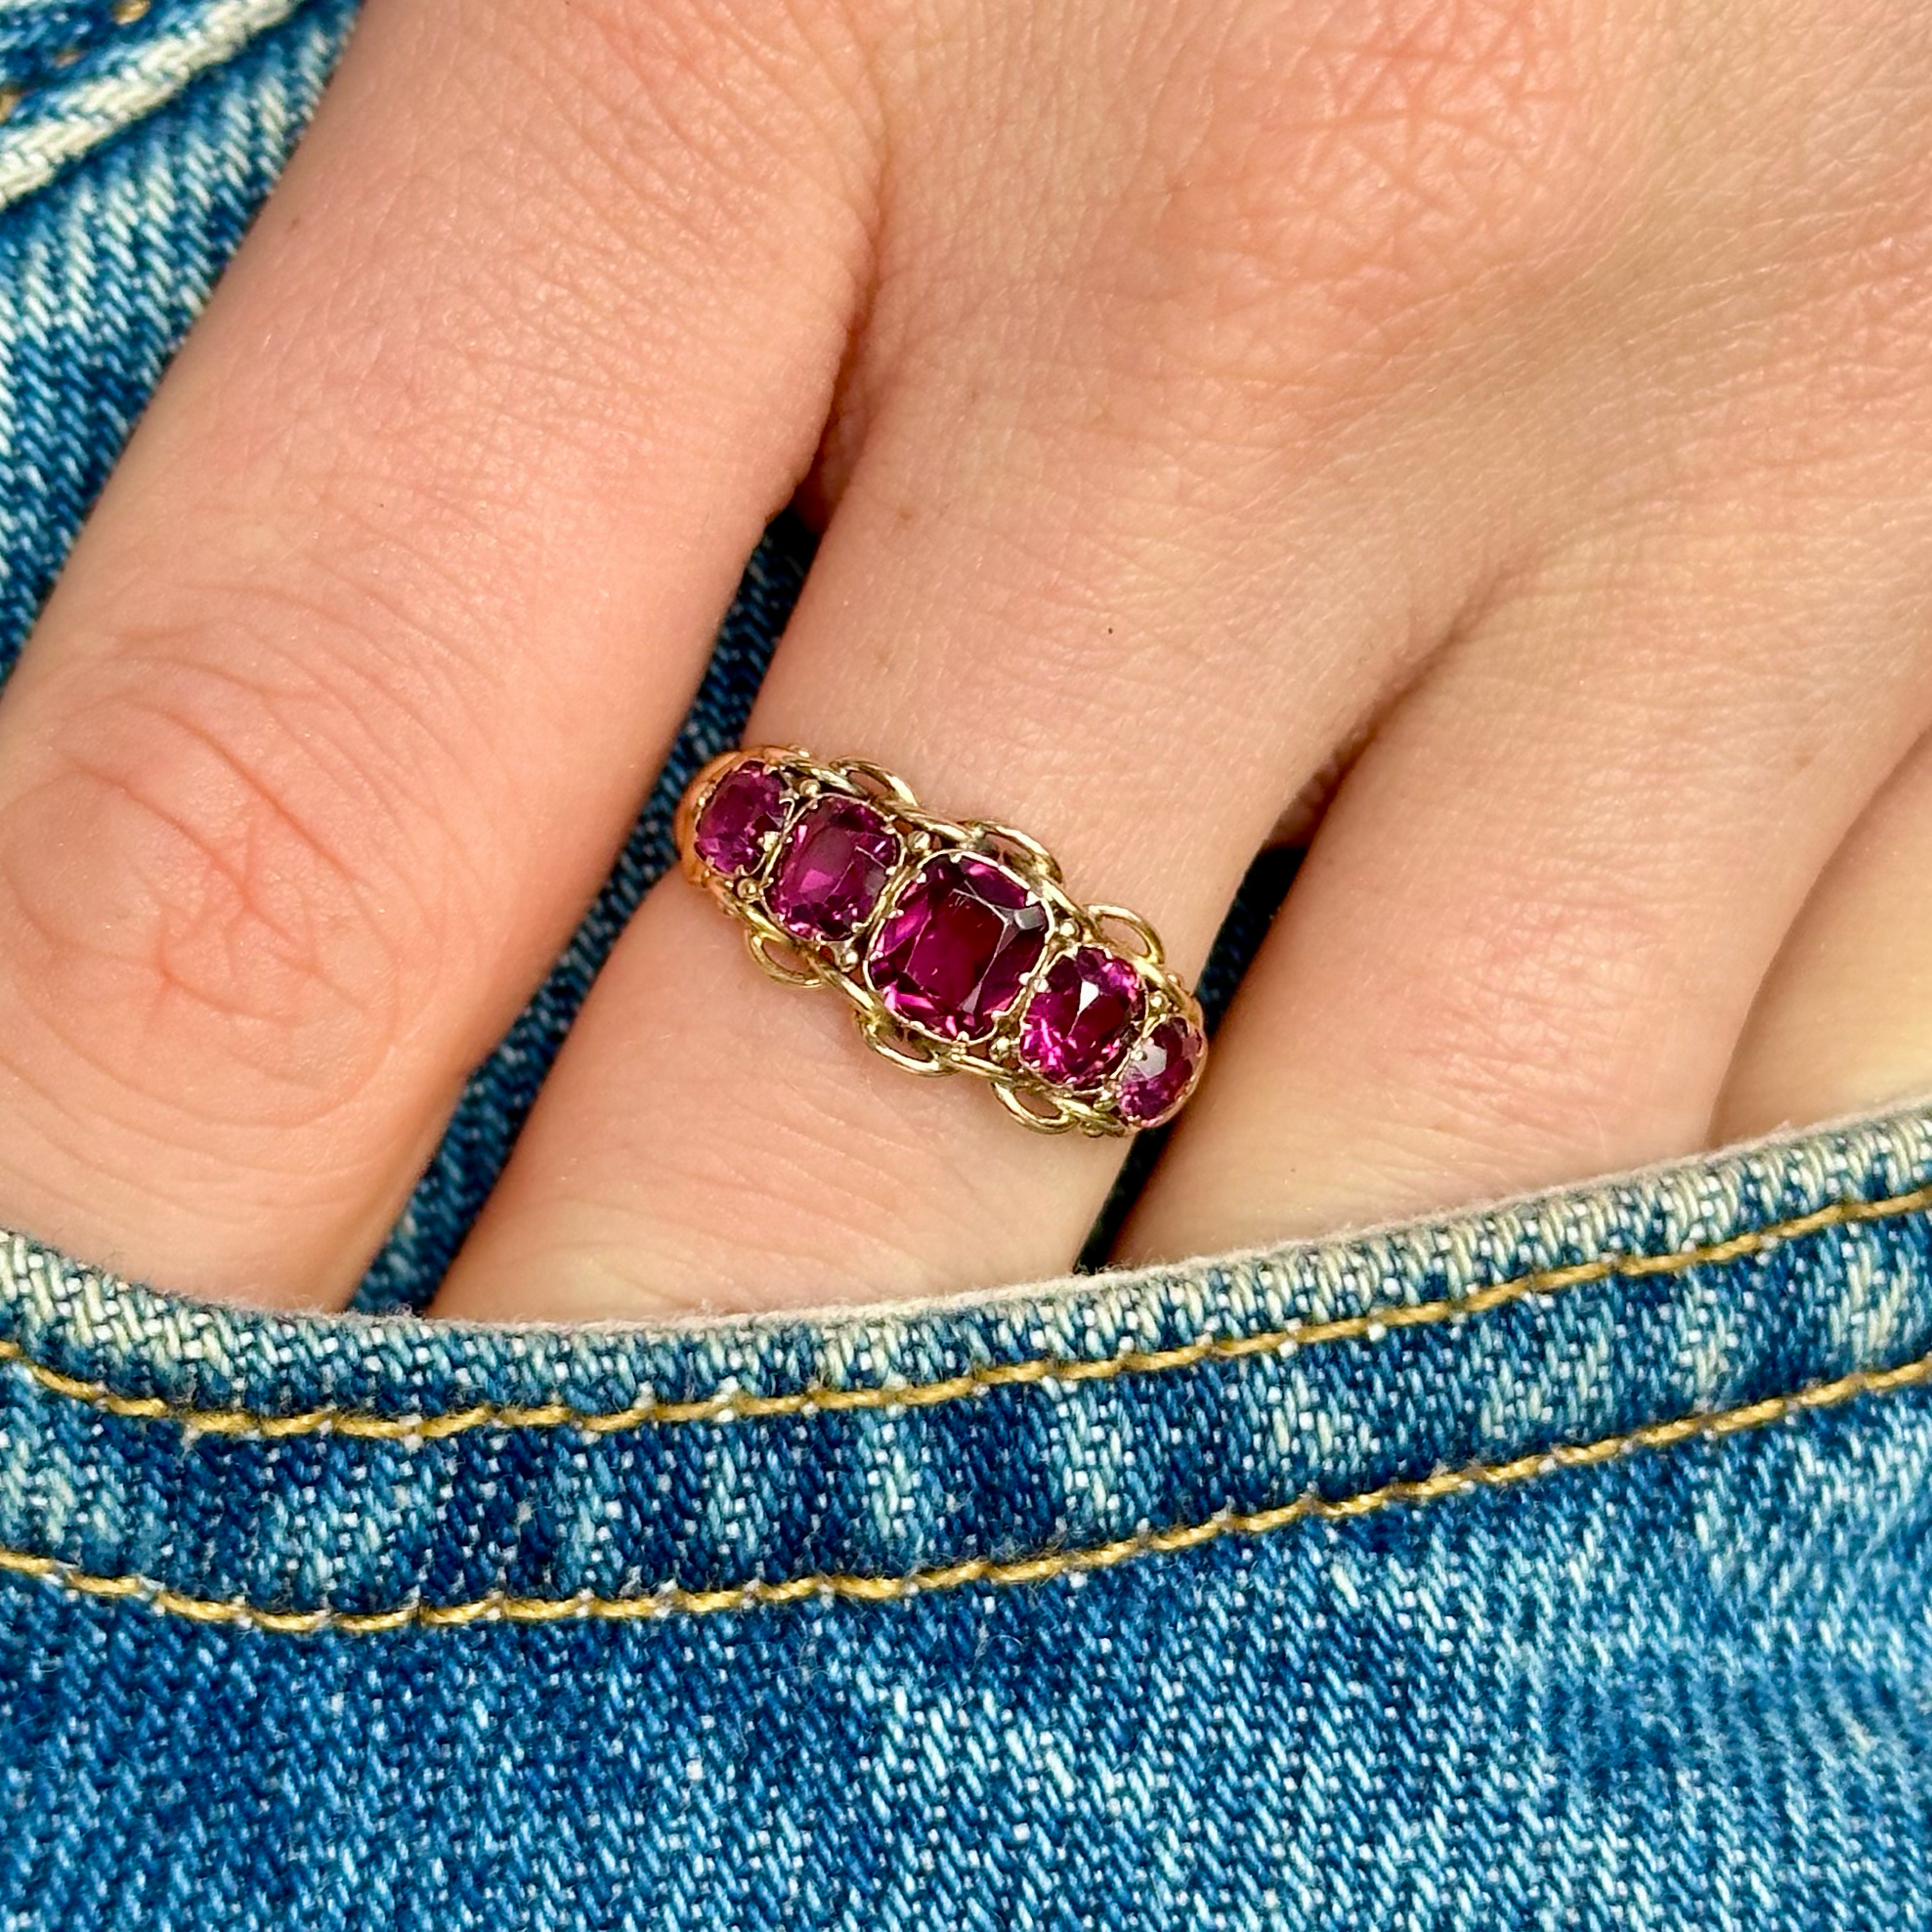 Victorian five stone garnet ring worn on hand in pocket of jeans